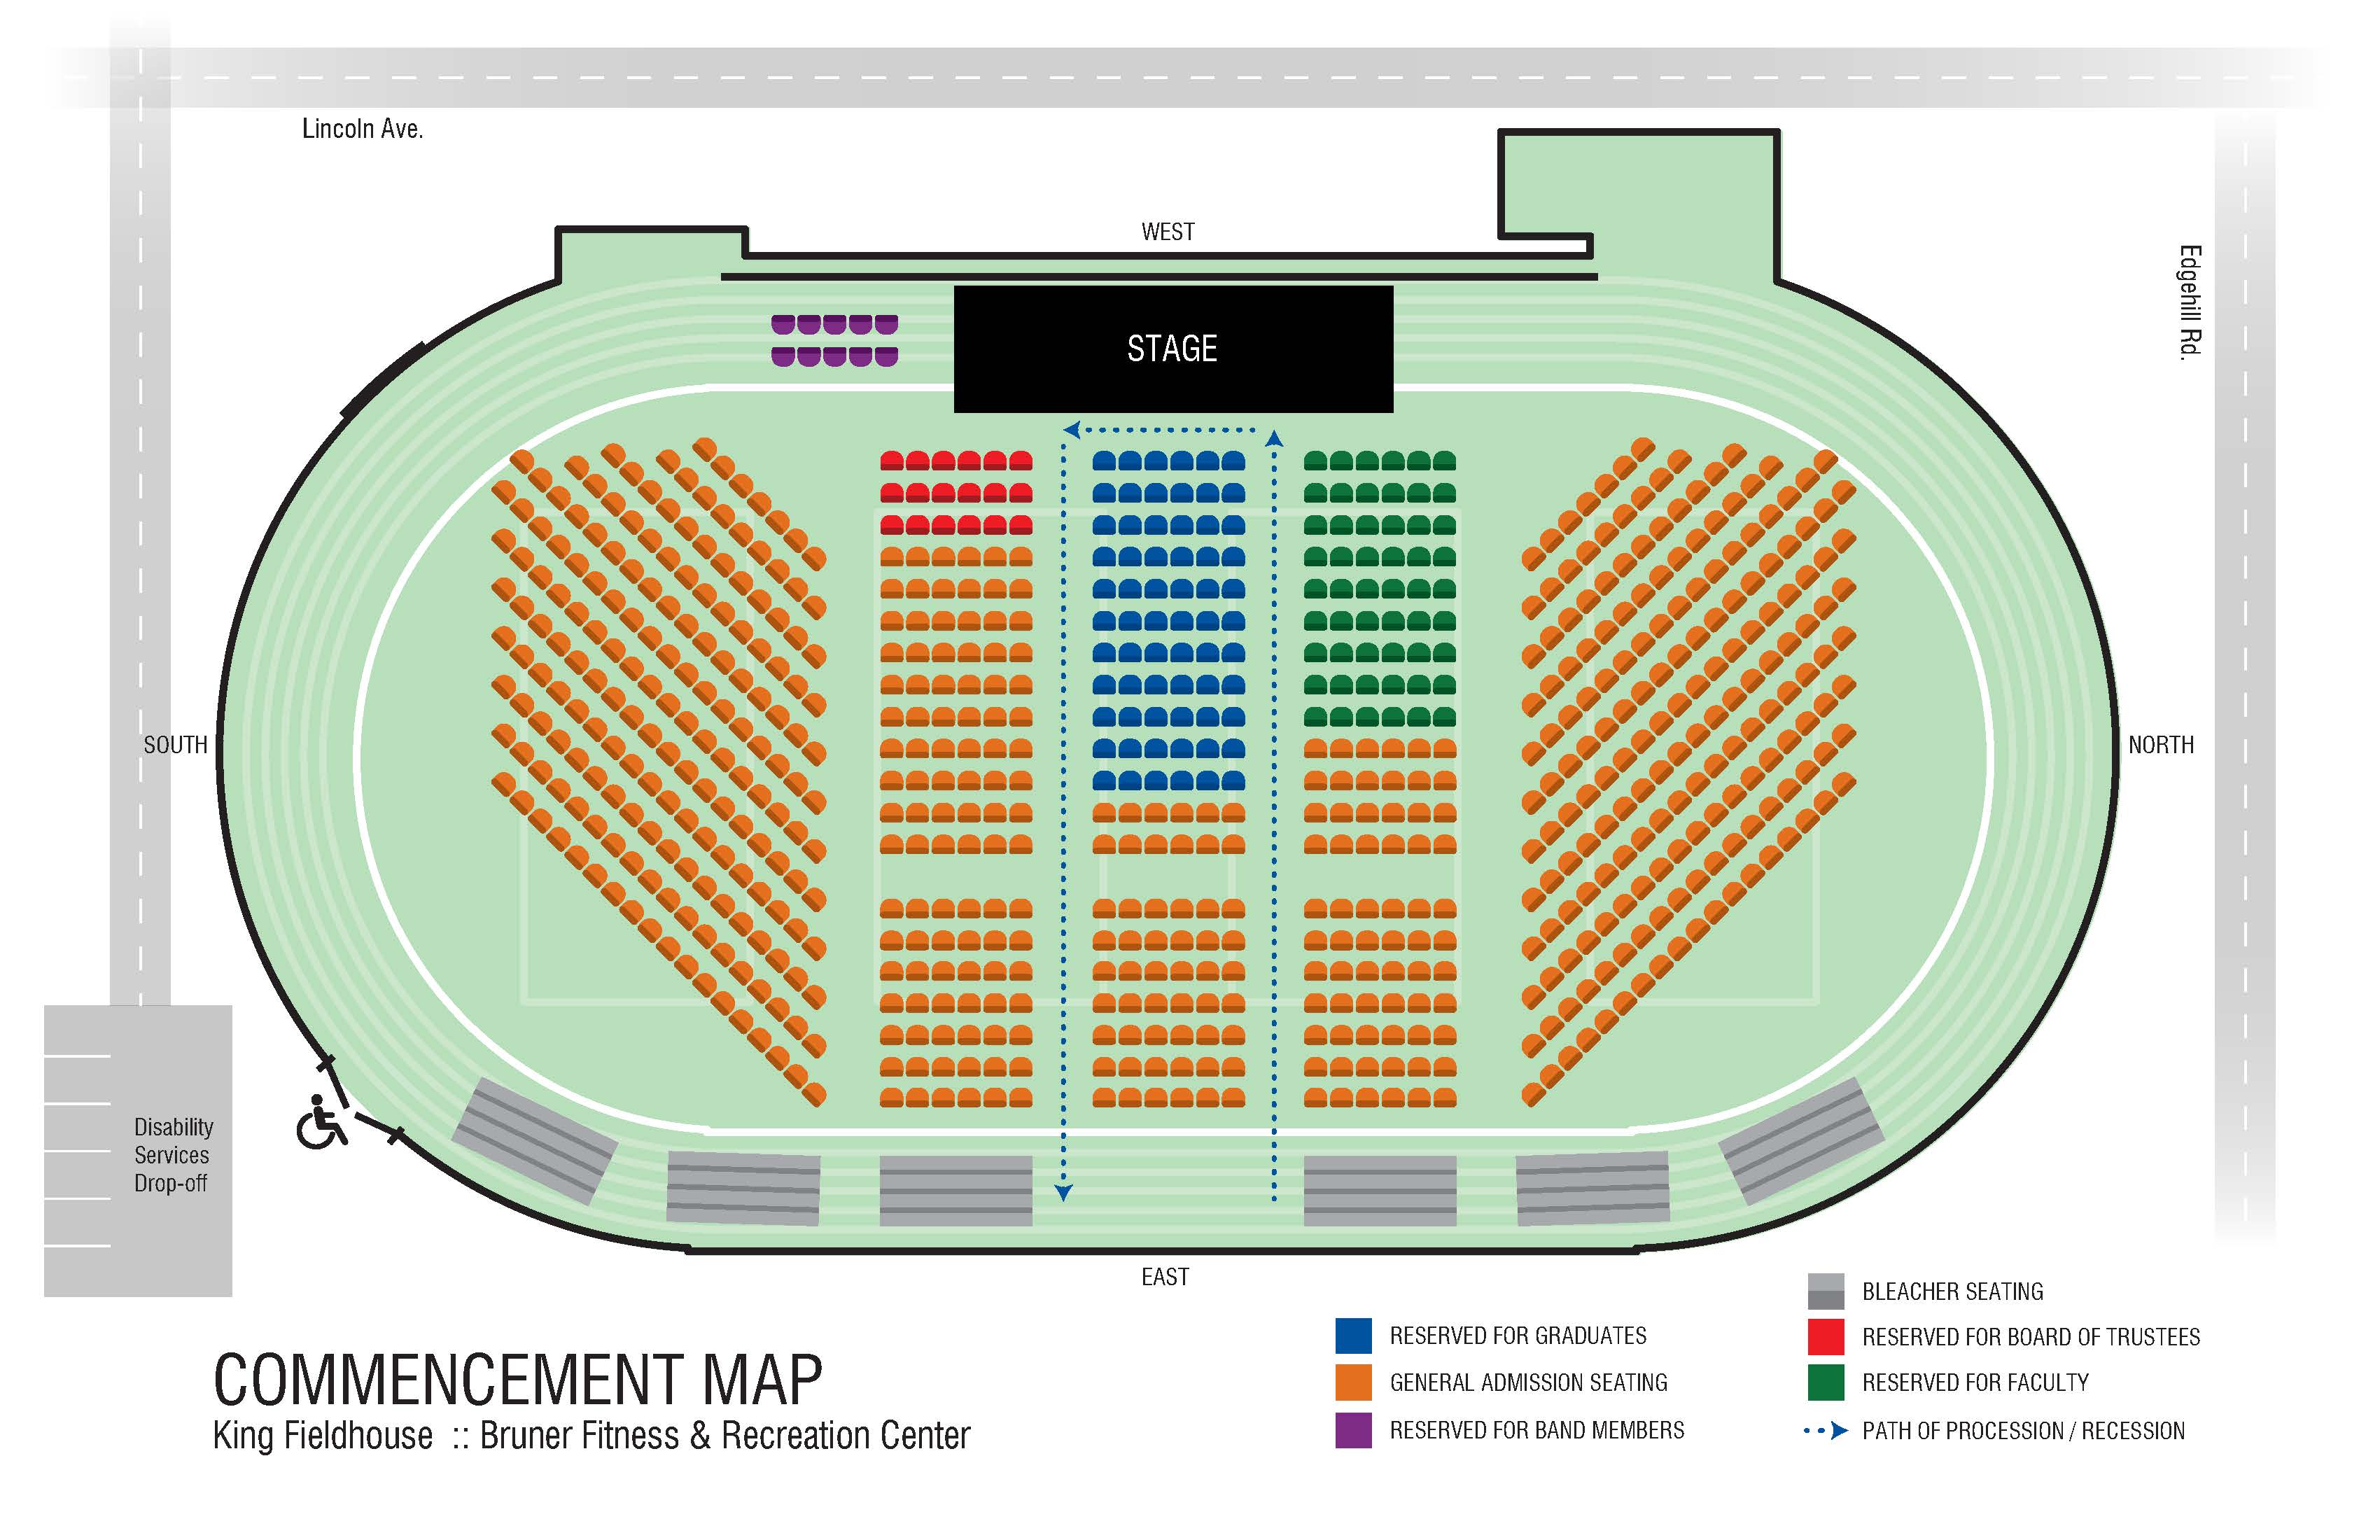 2023 Commencement seating map image